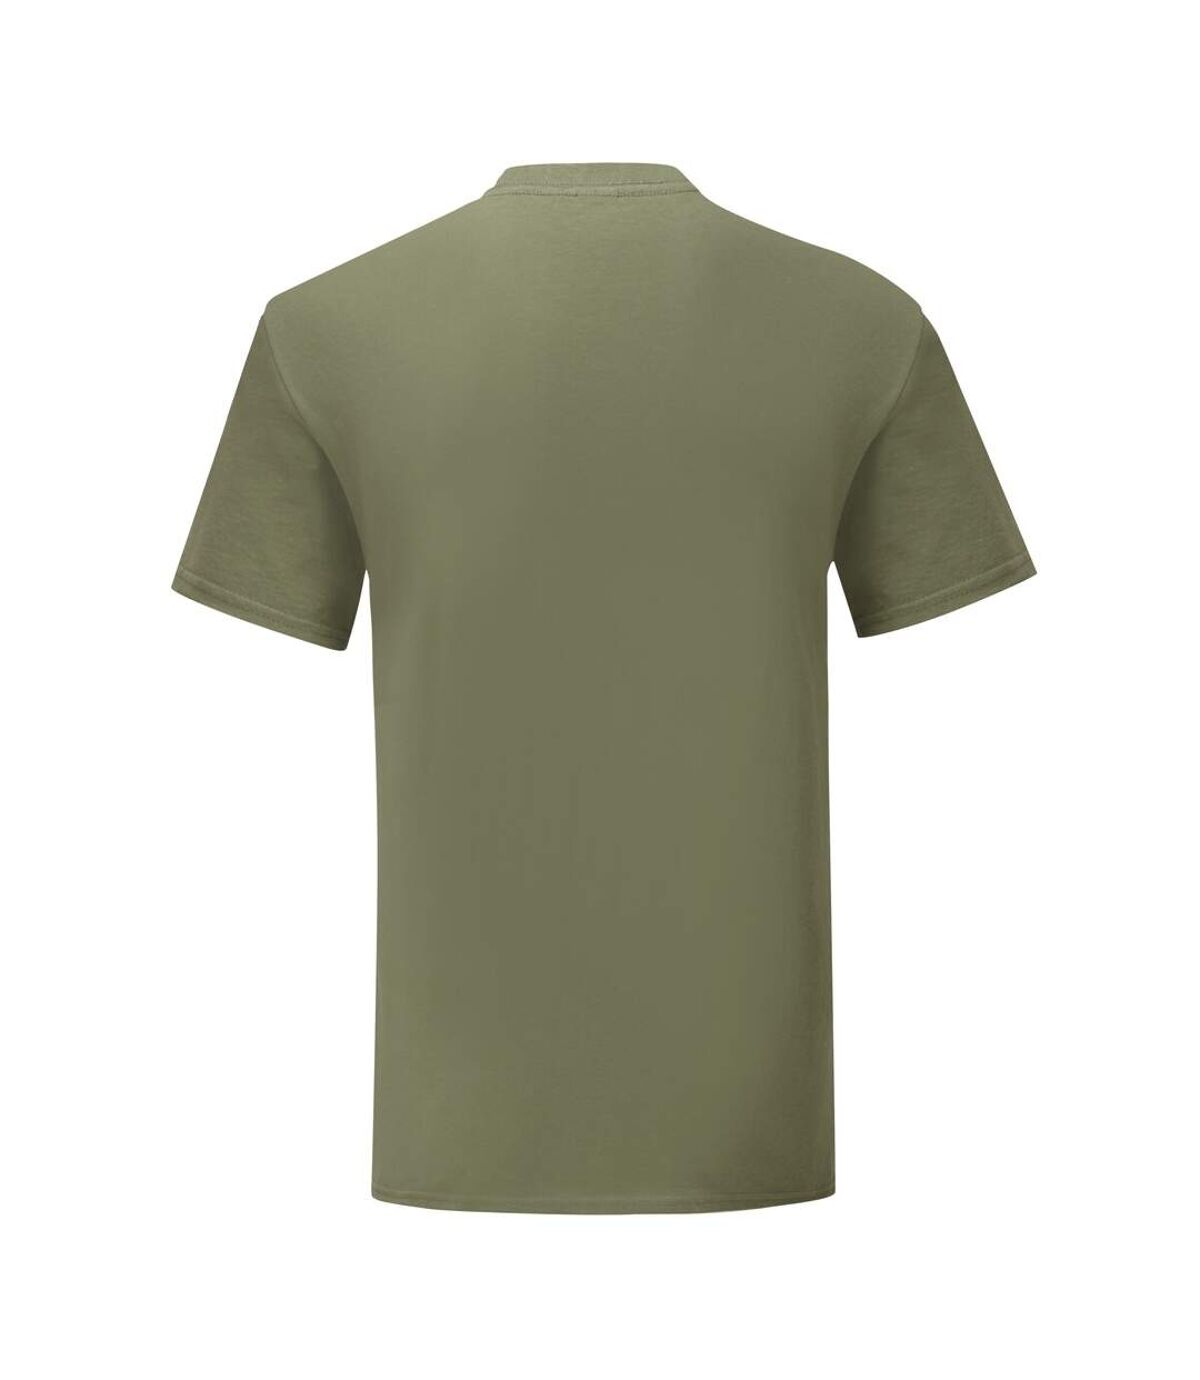 Fruit Of The Loom Mens Iconic T-Shirt (Classic Olive Green) - UTPC3389